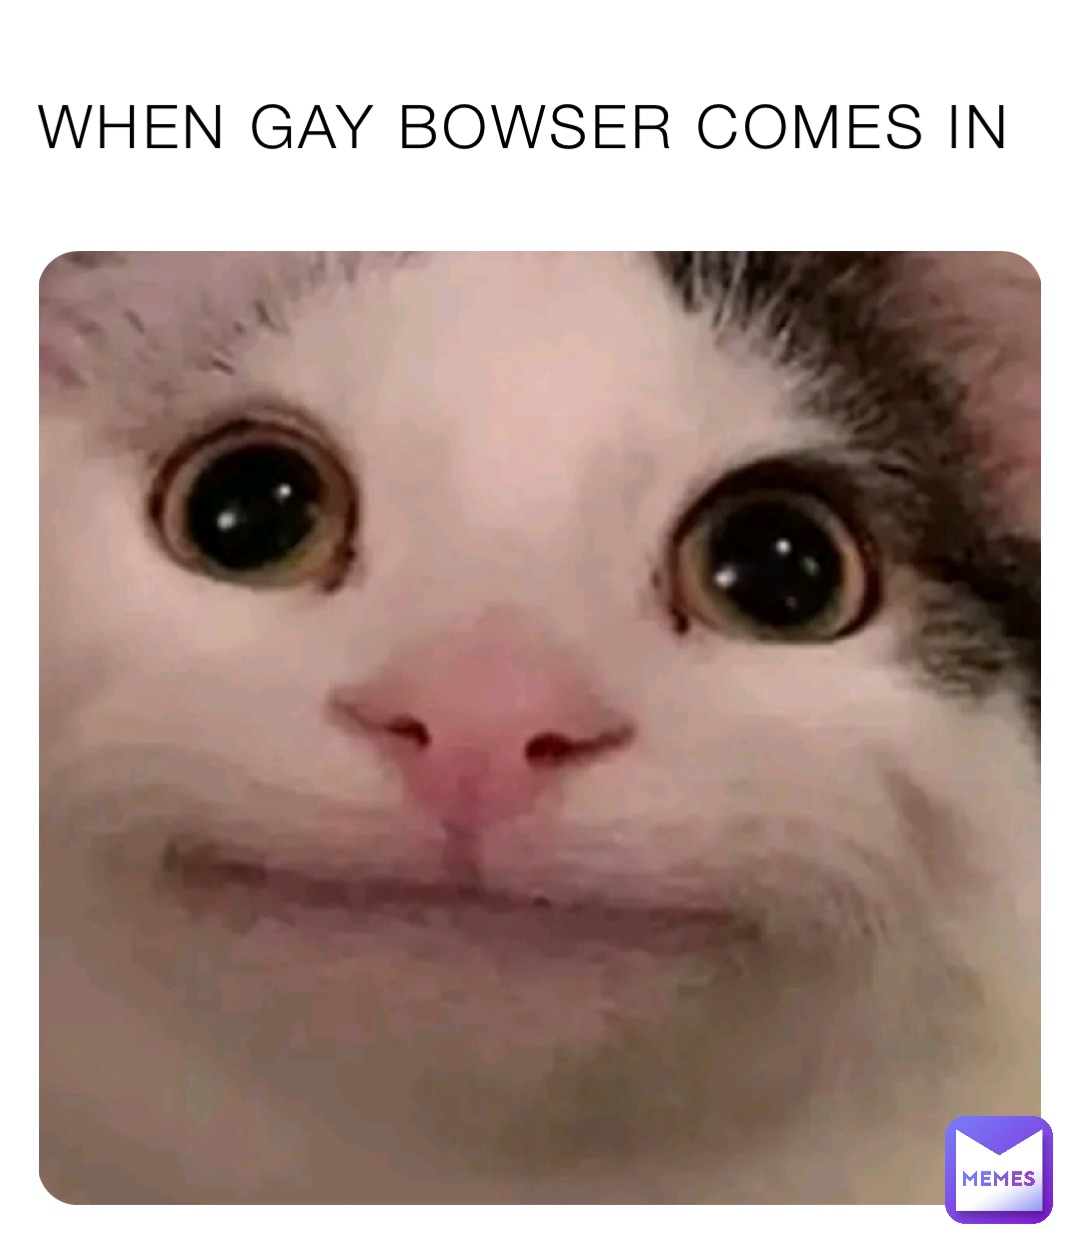 WHEN GAY BOWSER COMES IN